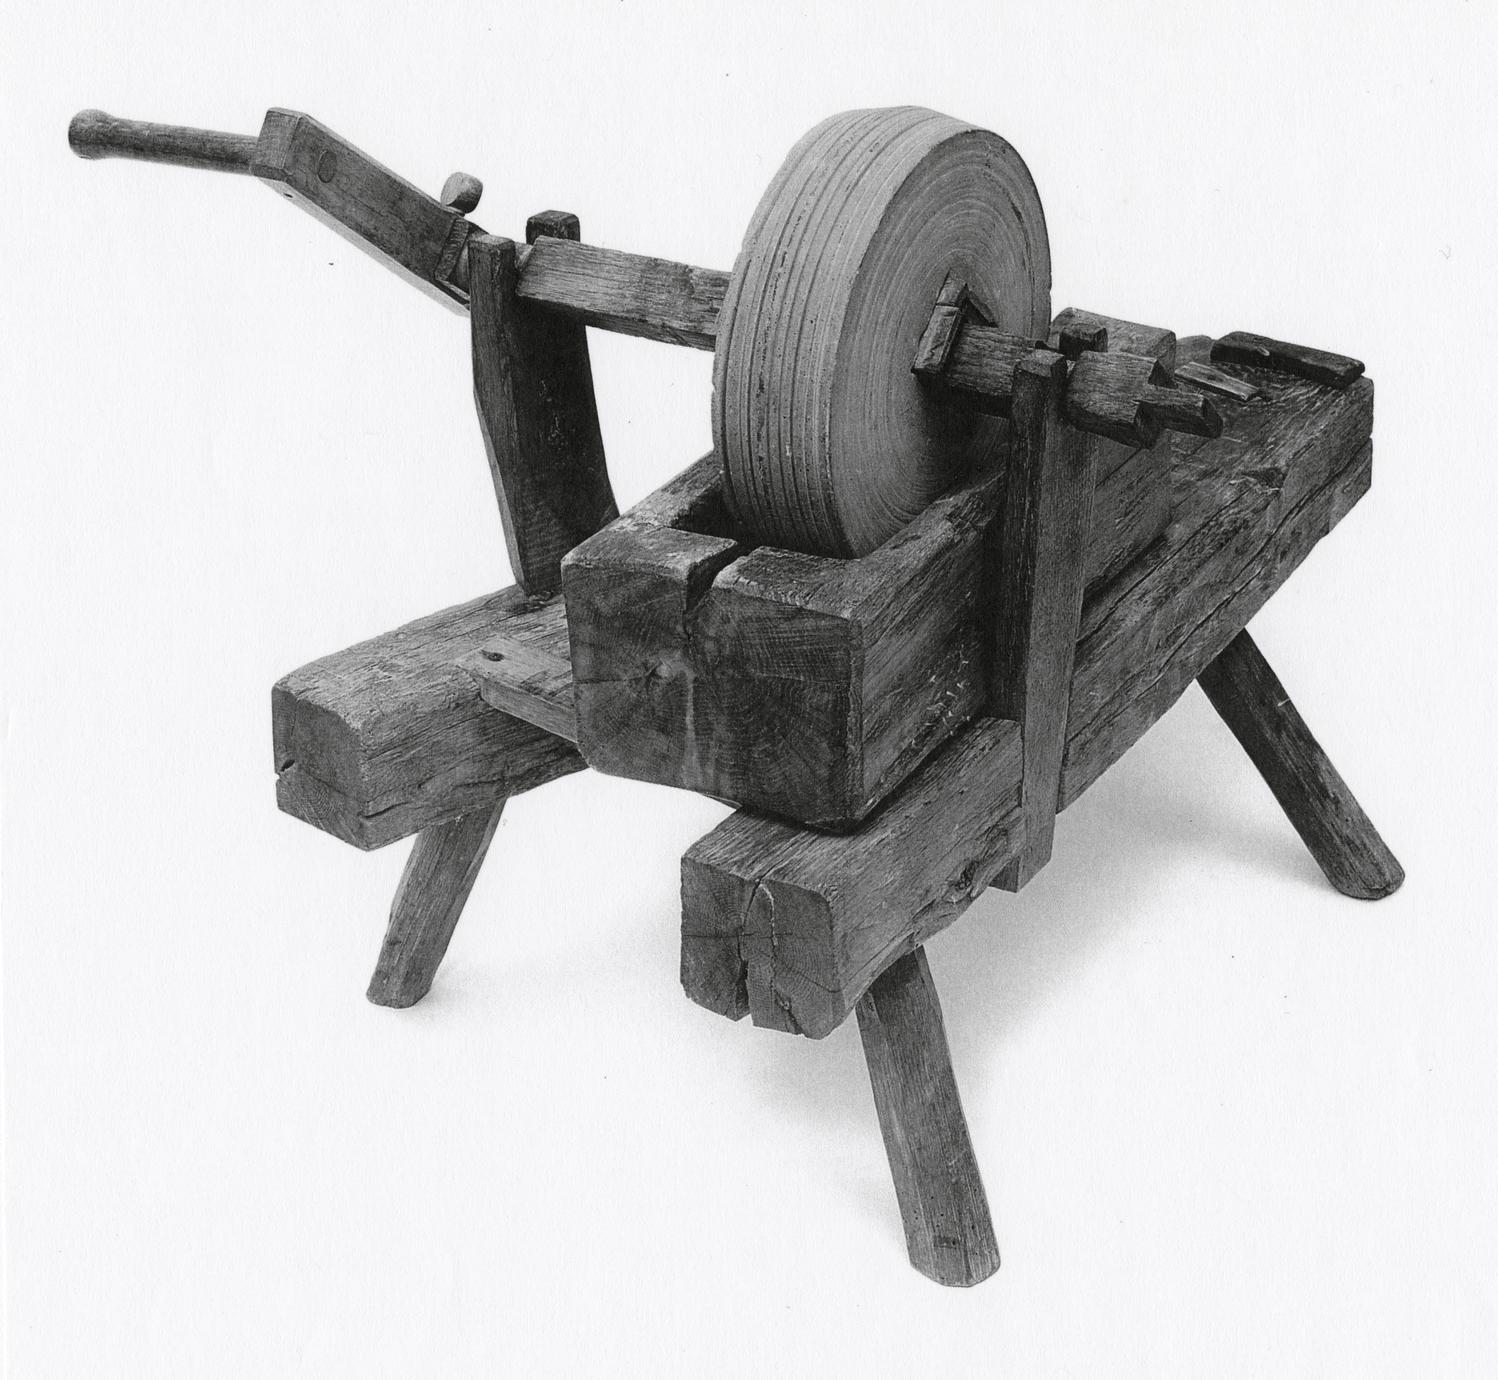 Example of a grindstone.